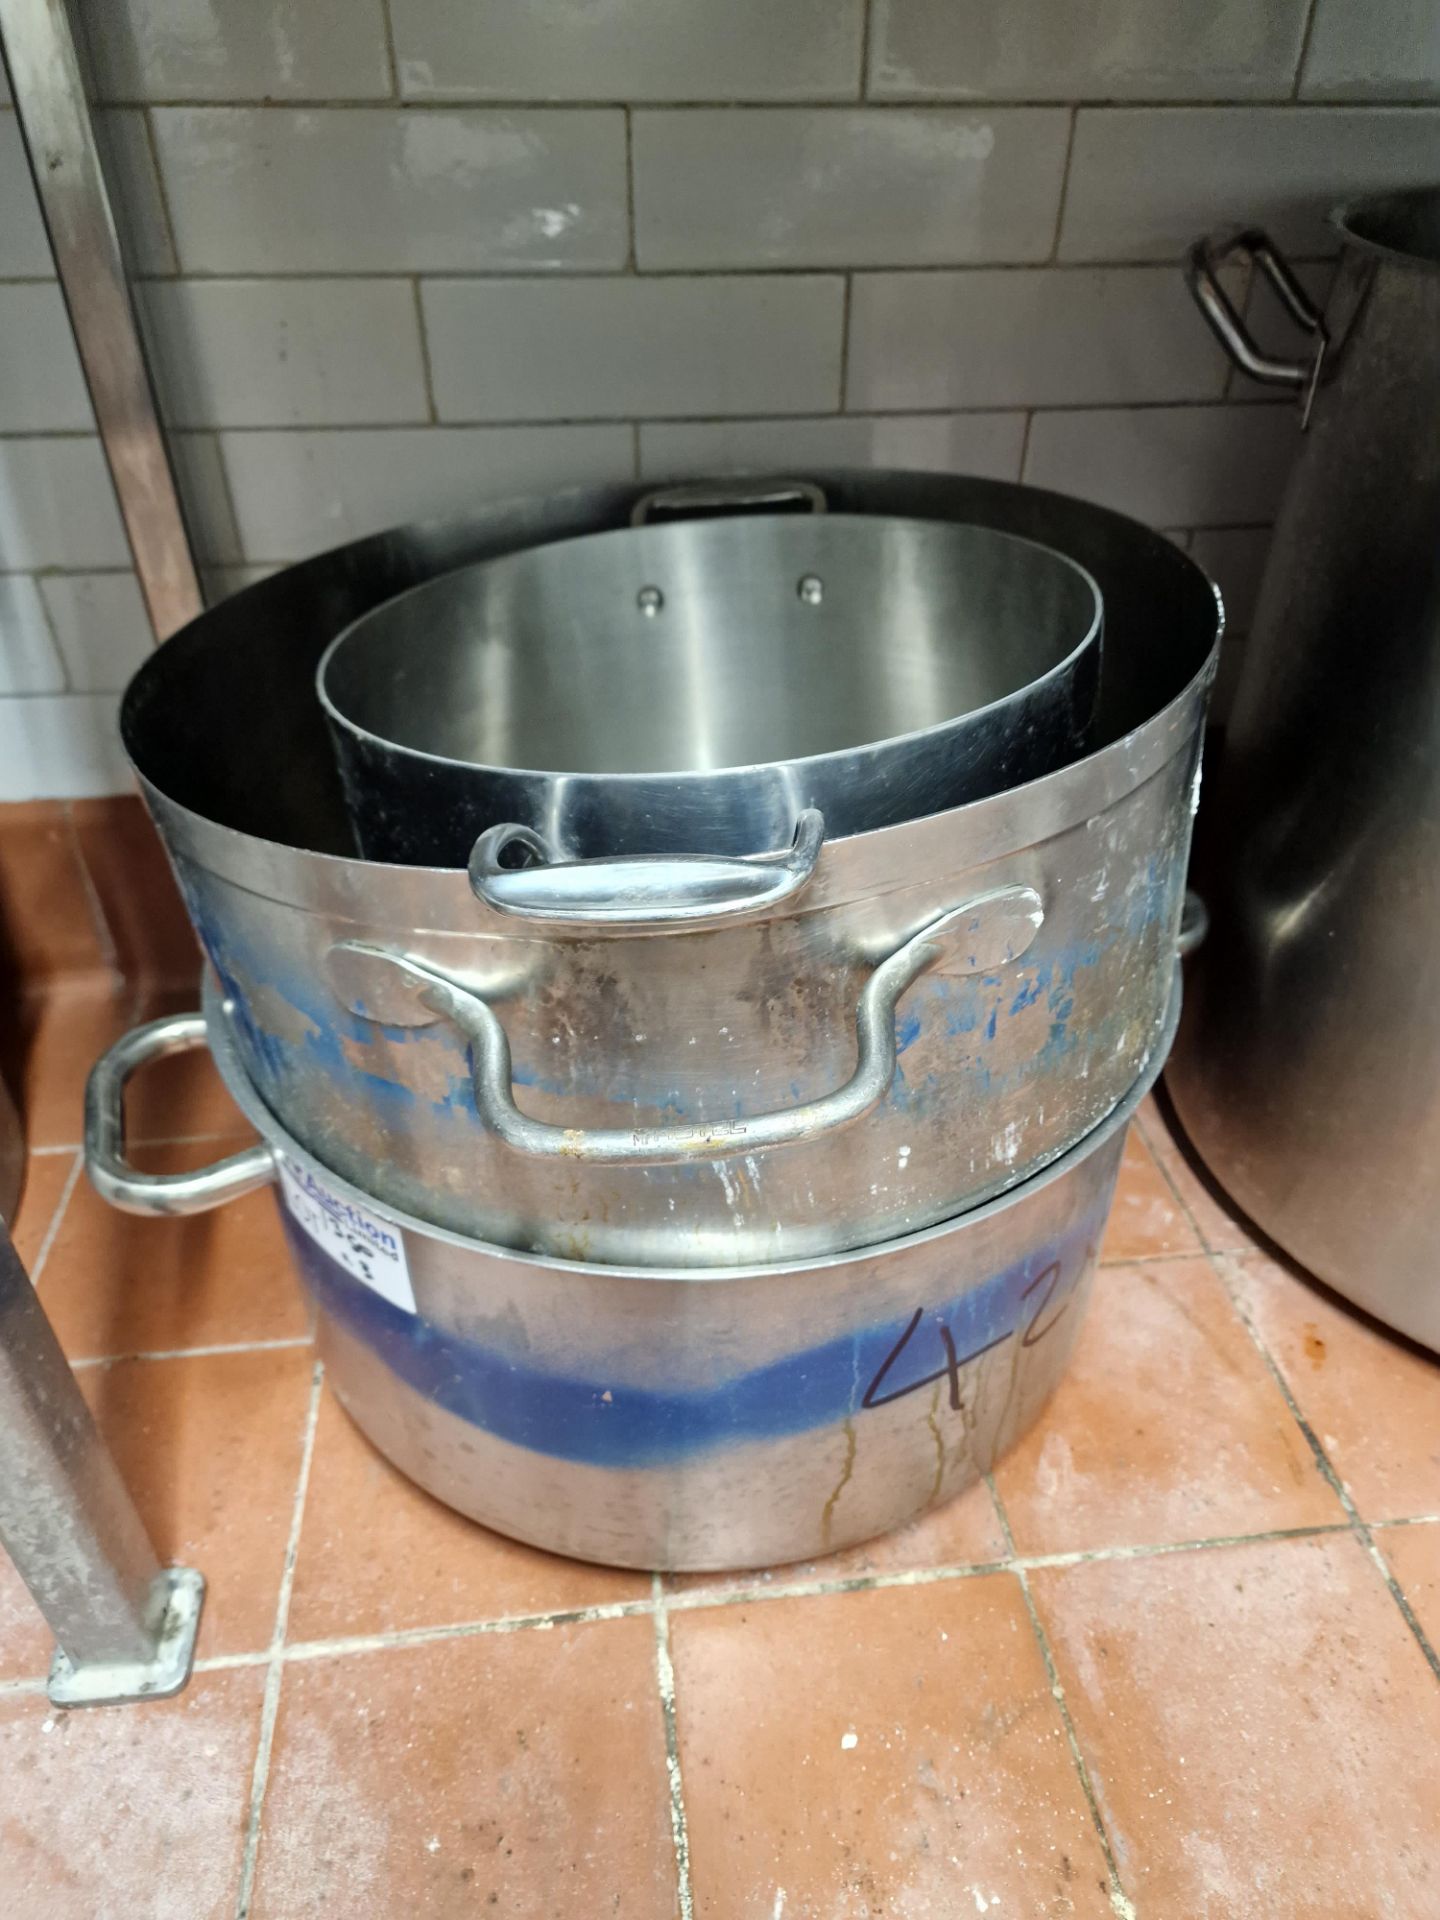 3 x Stainless Steel Commercial Stock Pots 29 x 10cm 40 x 16cm And 42 x 19cm Approximately 7 Litre,